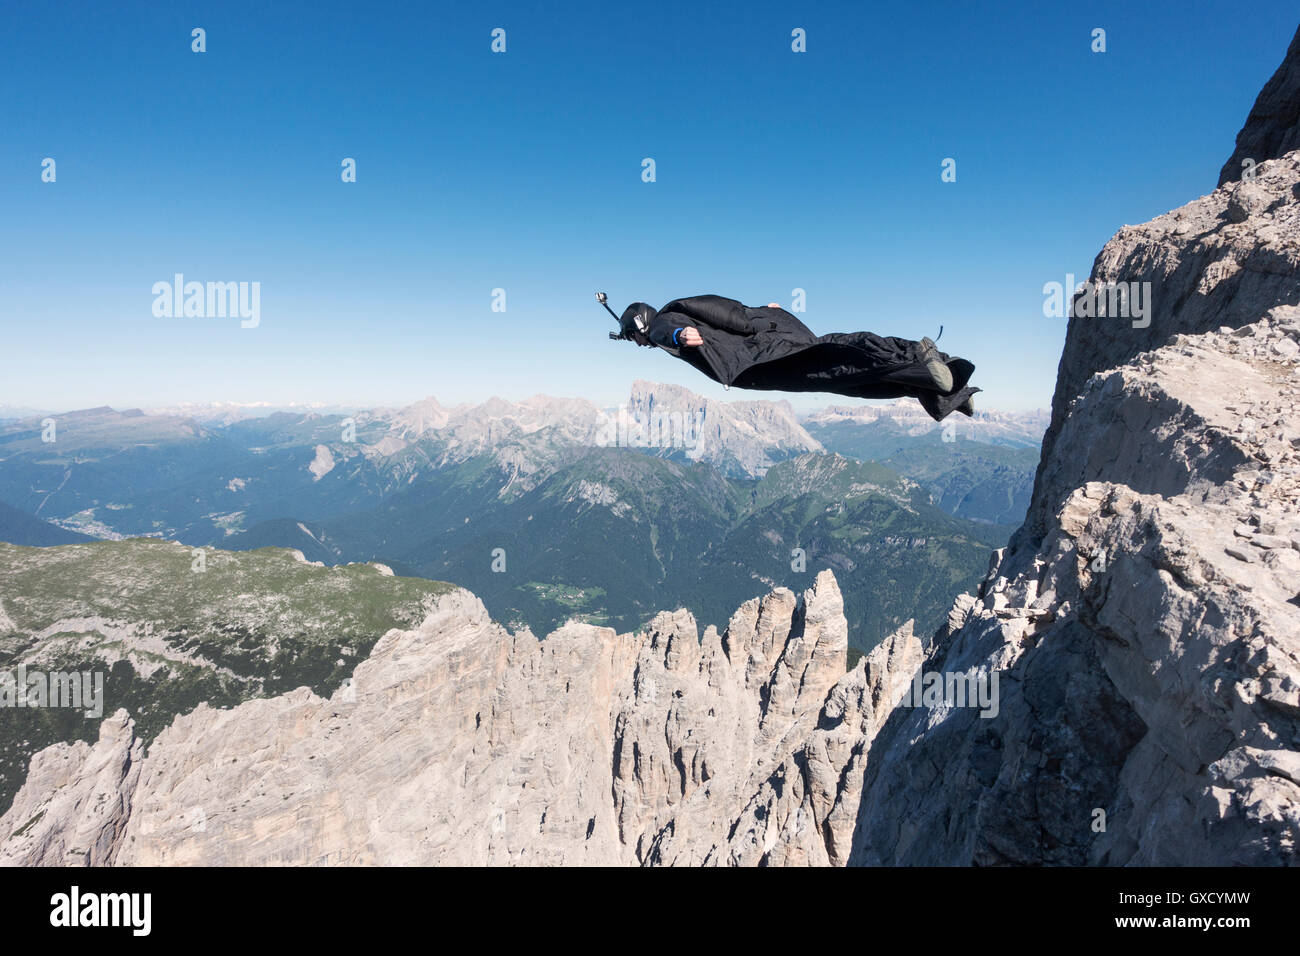 Wingsuit BASE jumper jumping from cliff, Italian Alps, Alleghe, Belluno, Italy Stock Photo